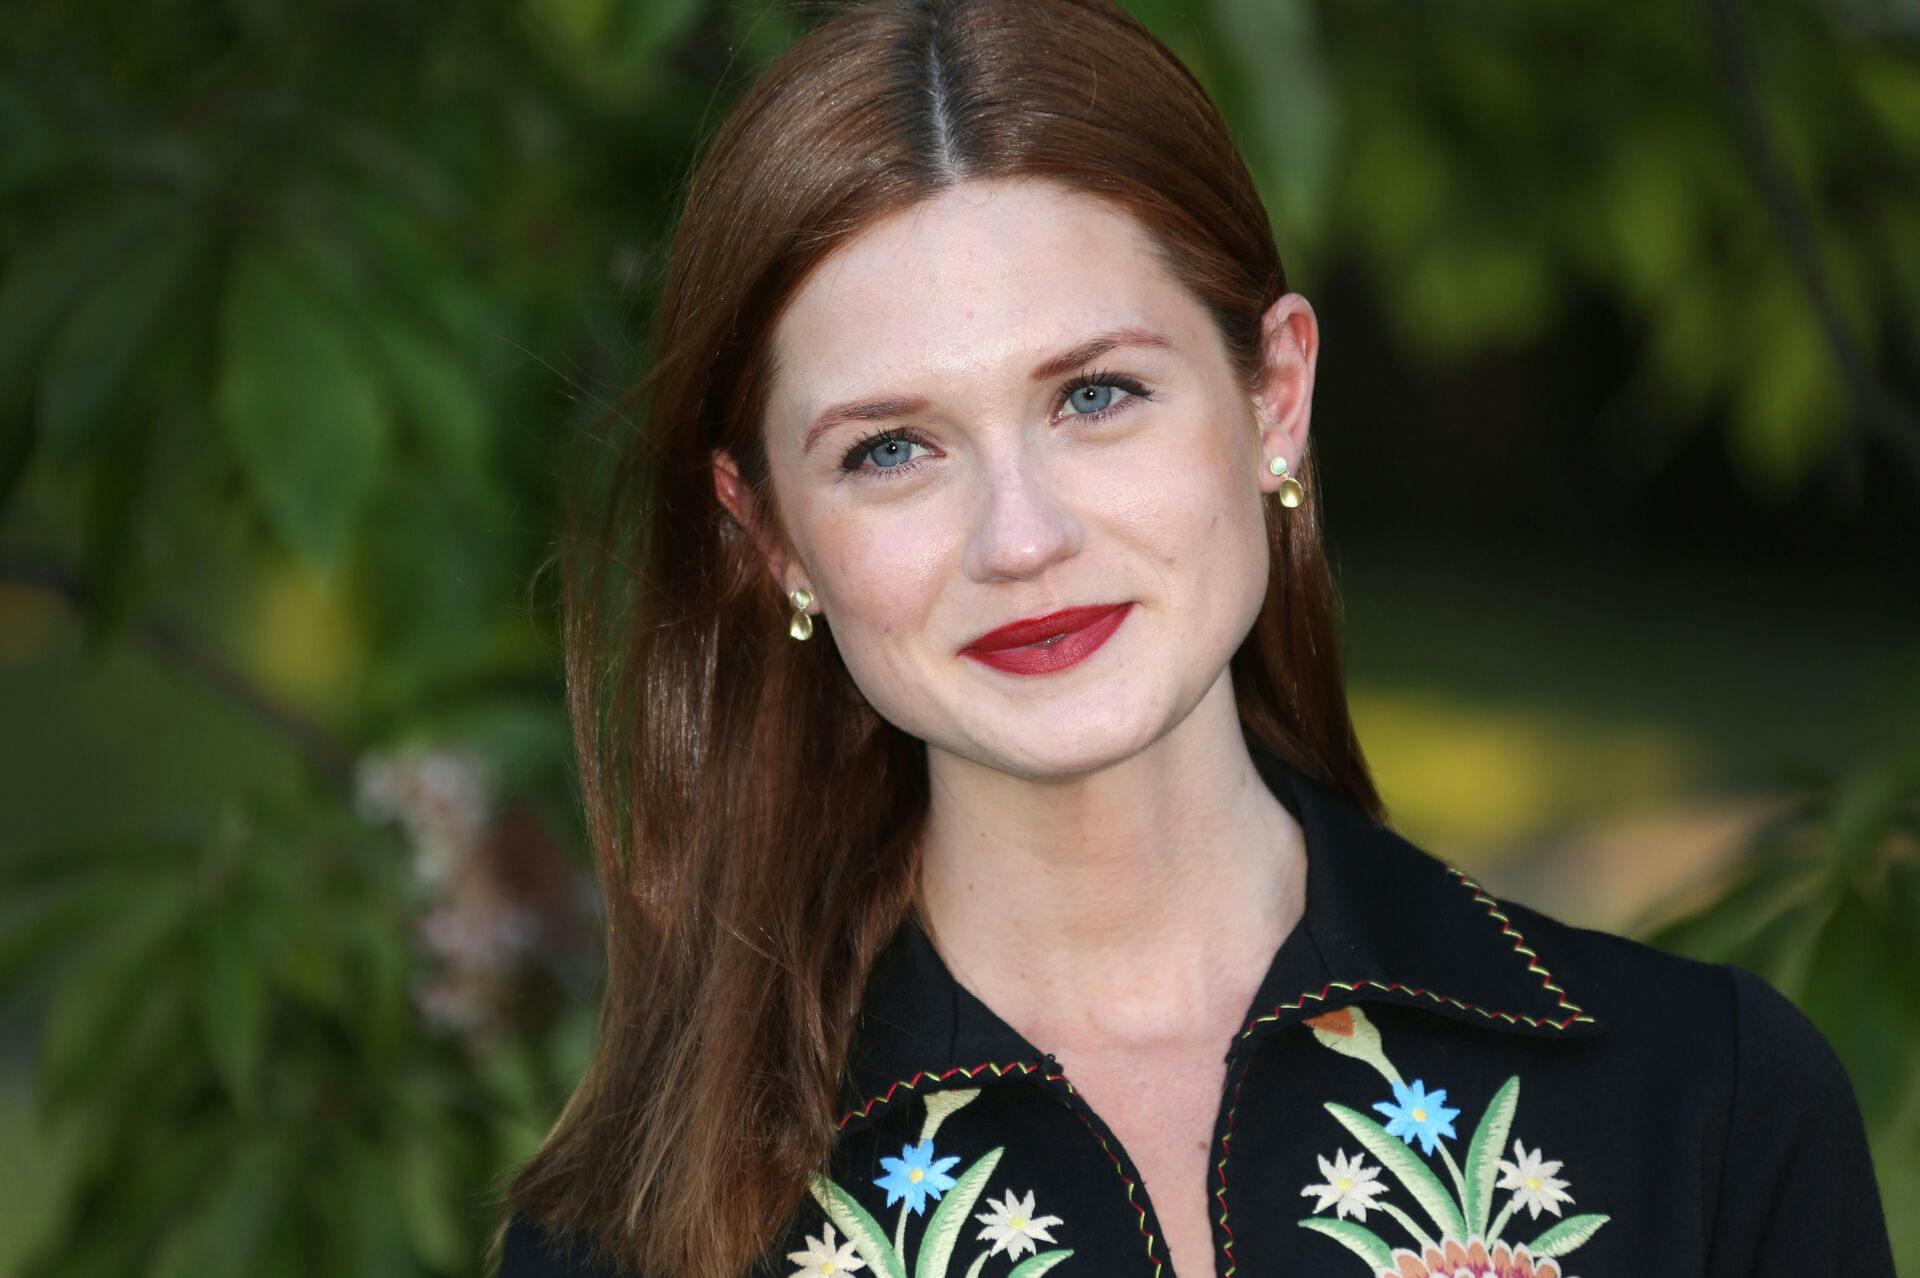 Bonnie Wright arrives for the Serpentine Gallery Summer Party in Hyde Park, central London, Tuesday, July 1, 2014. (Photo by Joel Ryan/Invision/AP)